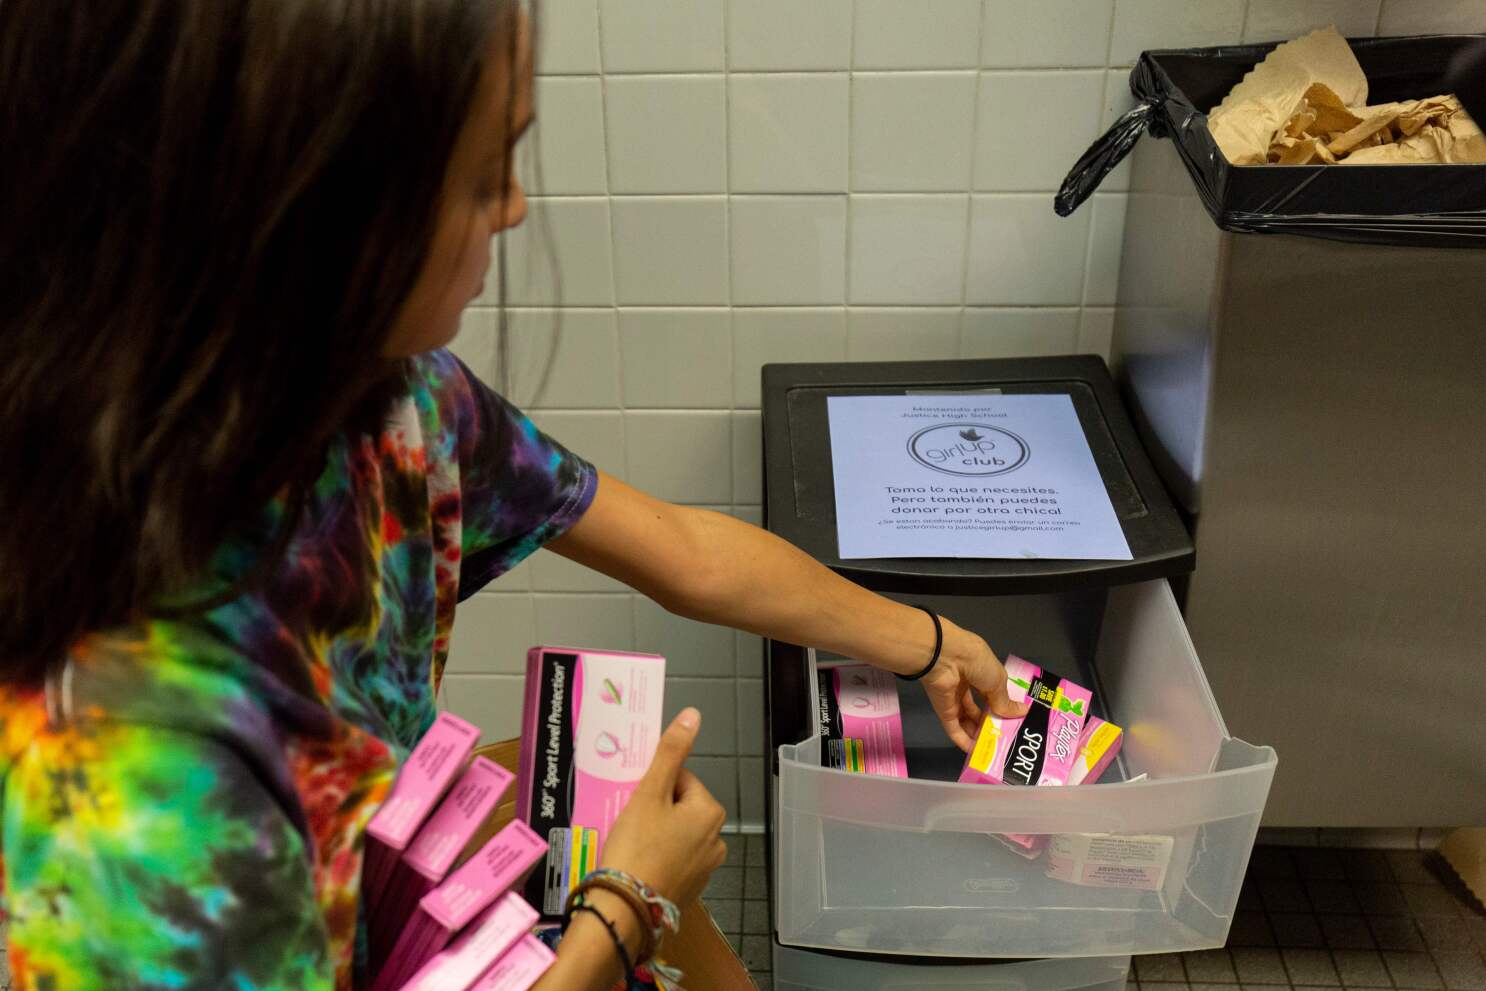 equity': may offer free tampons and pads in public bathrooms - Los Angeles Times